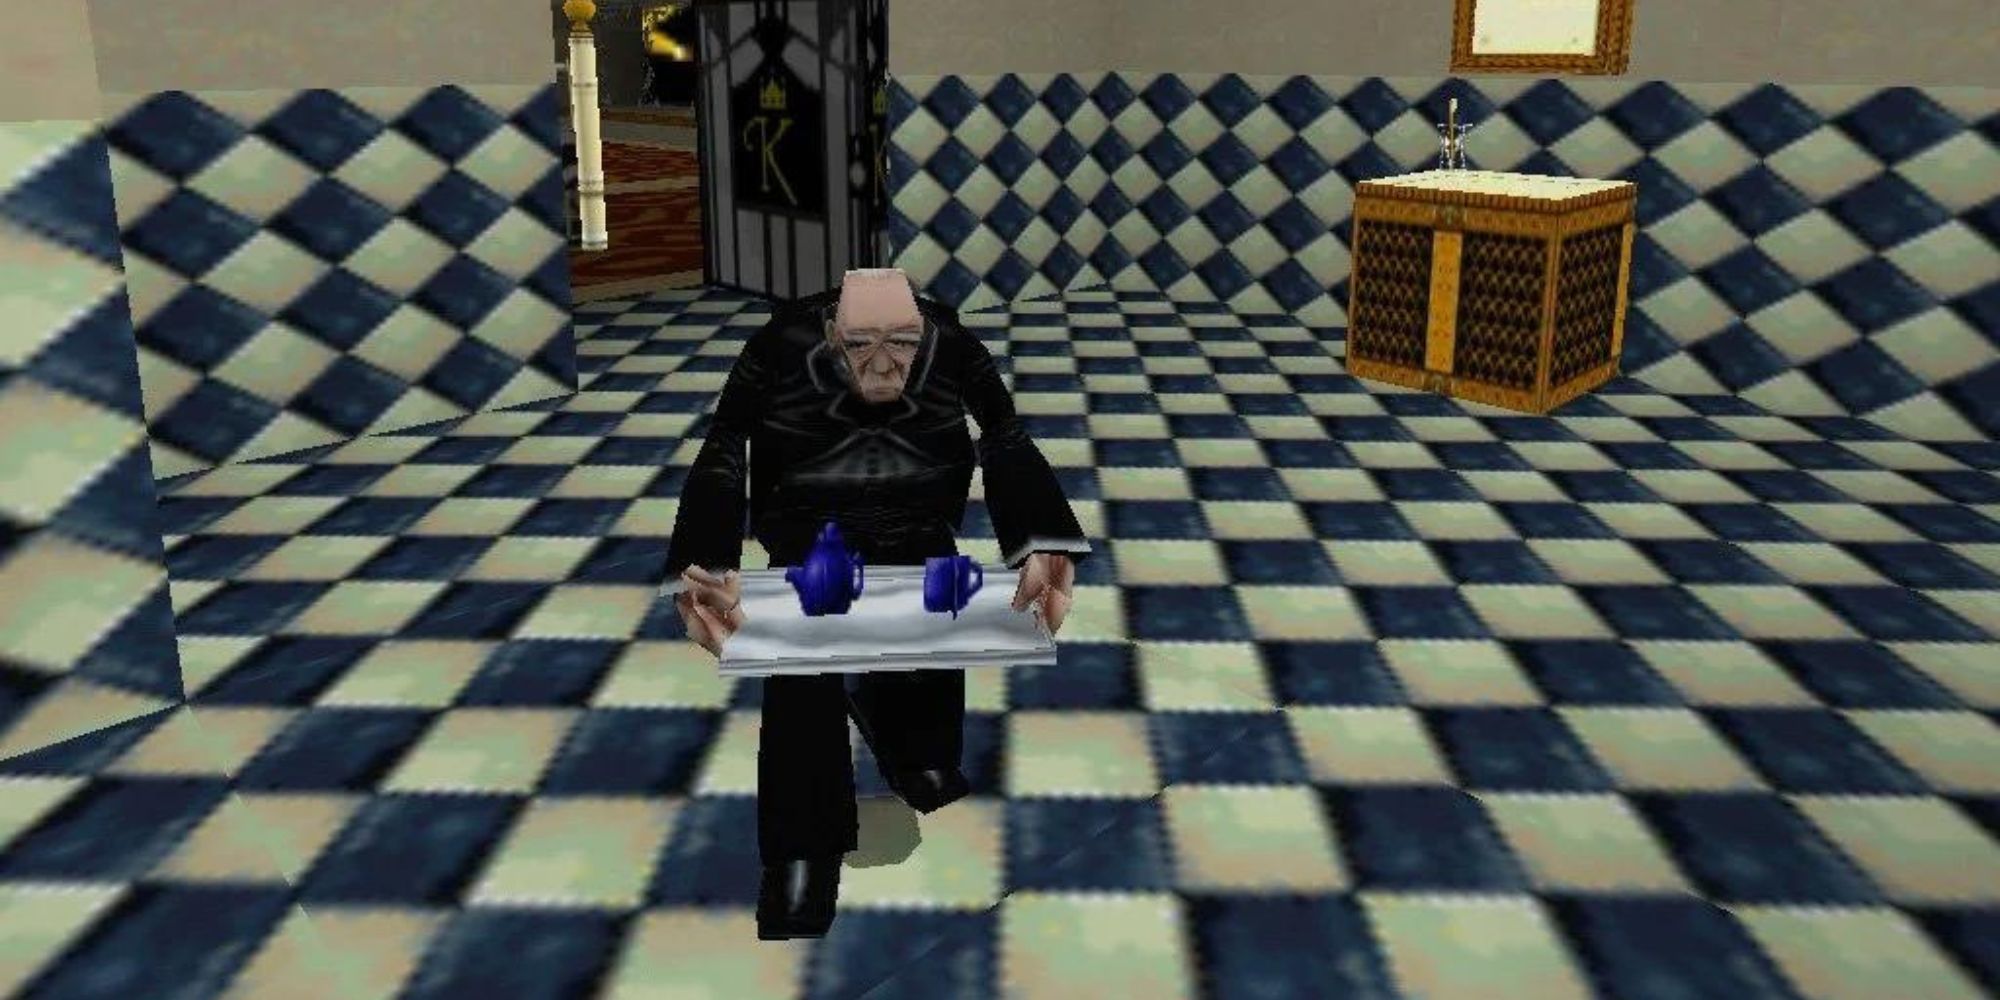 The butler Winston standing in the bathroom holding a tray in the game Tomb Raider 2